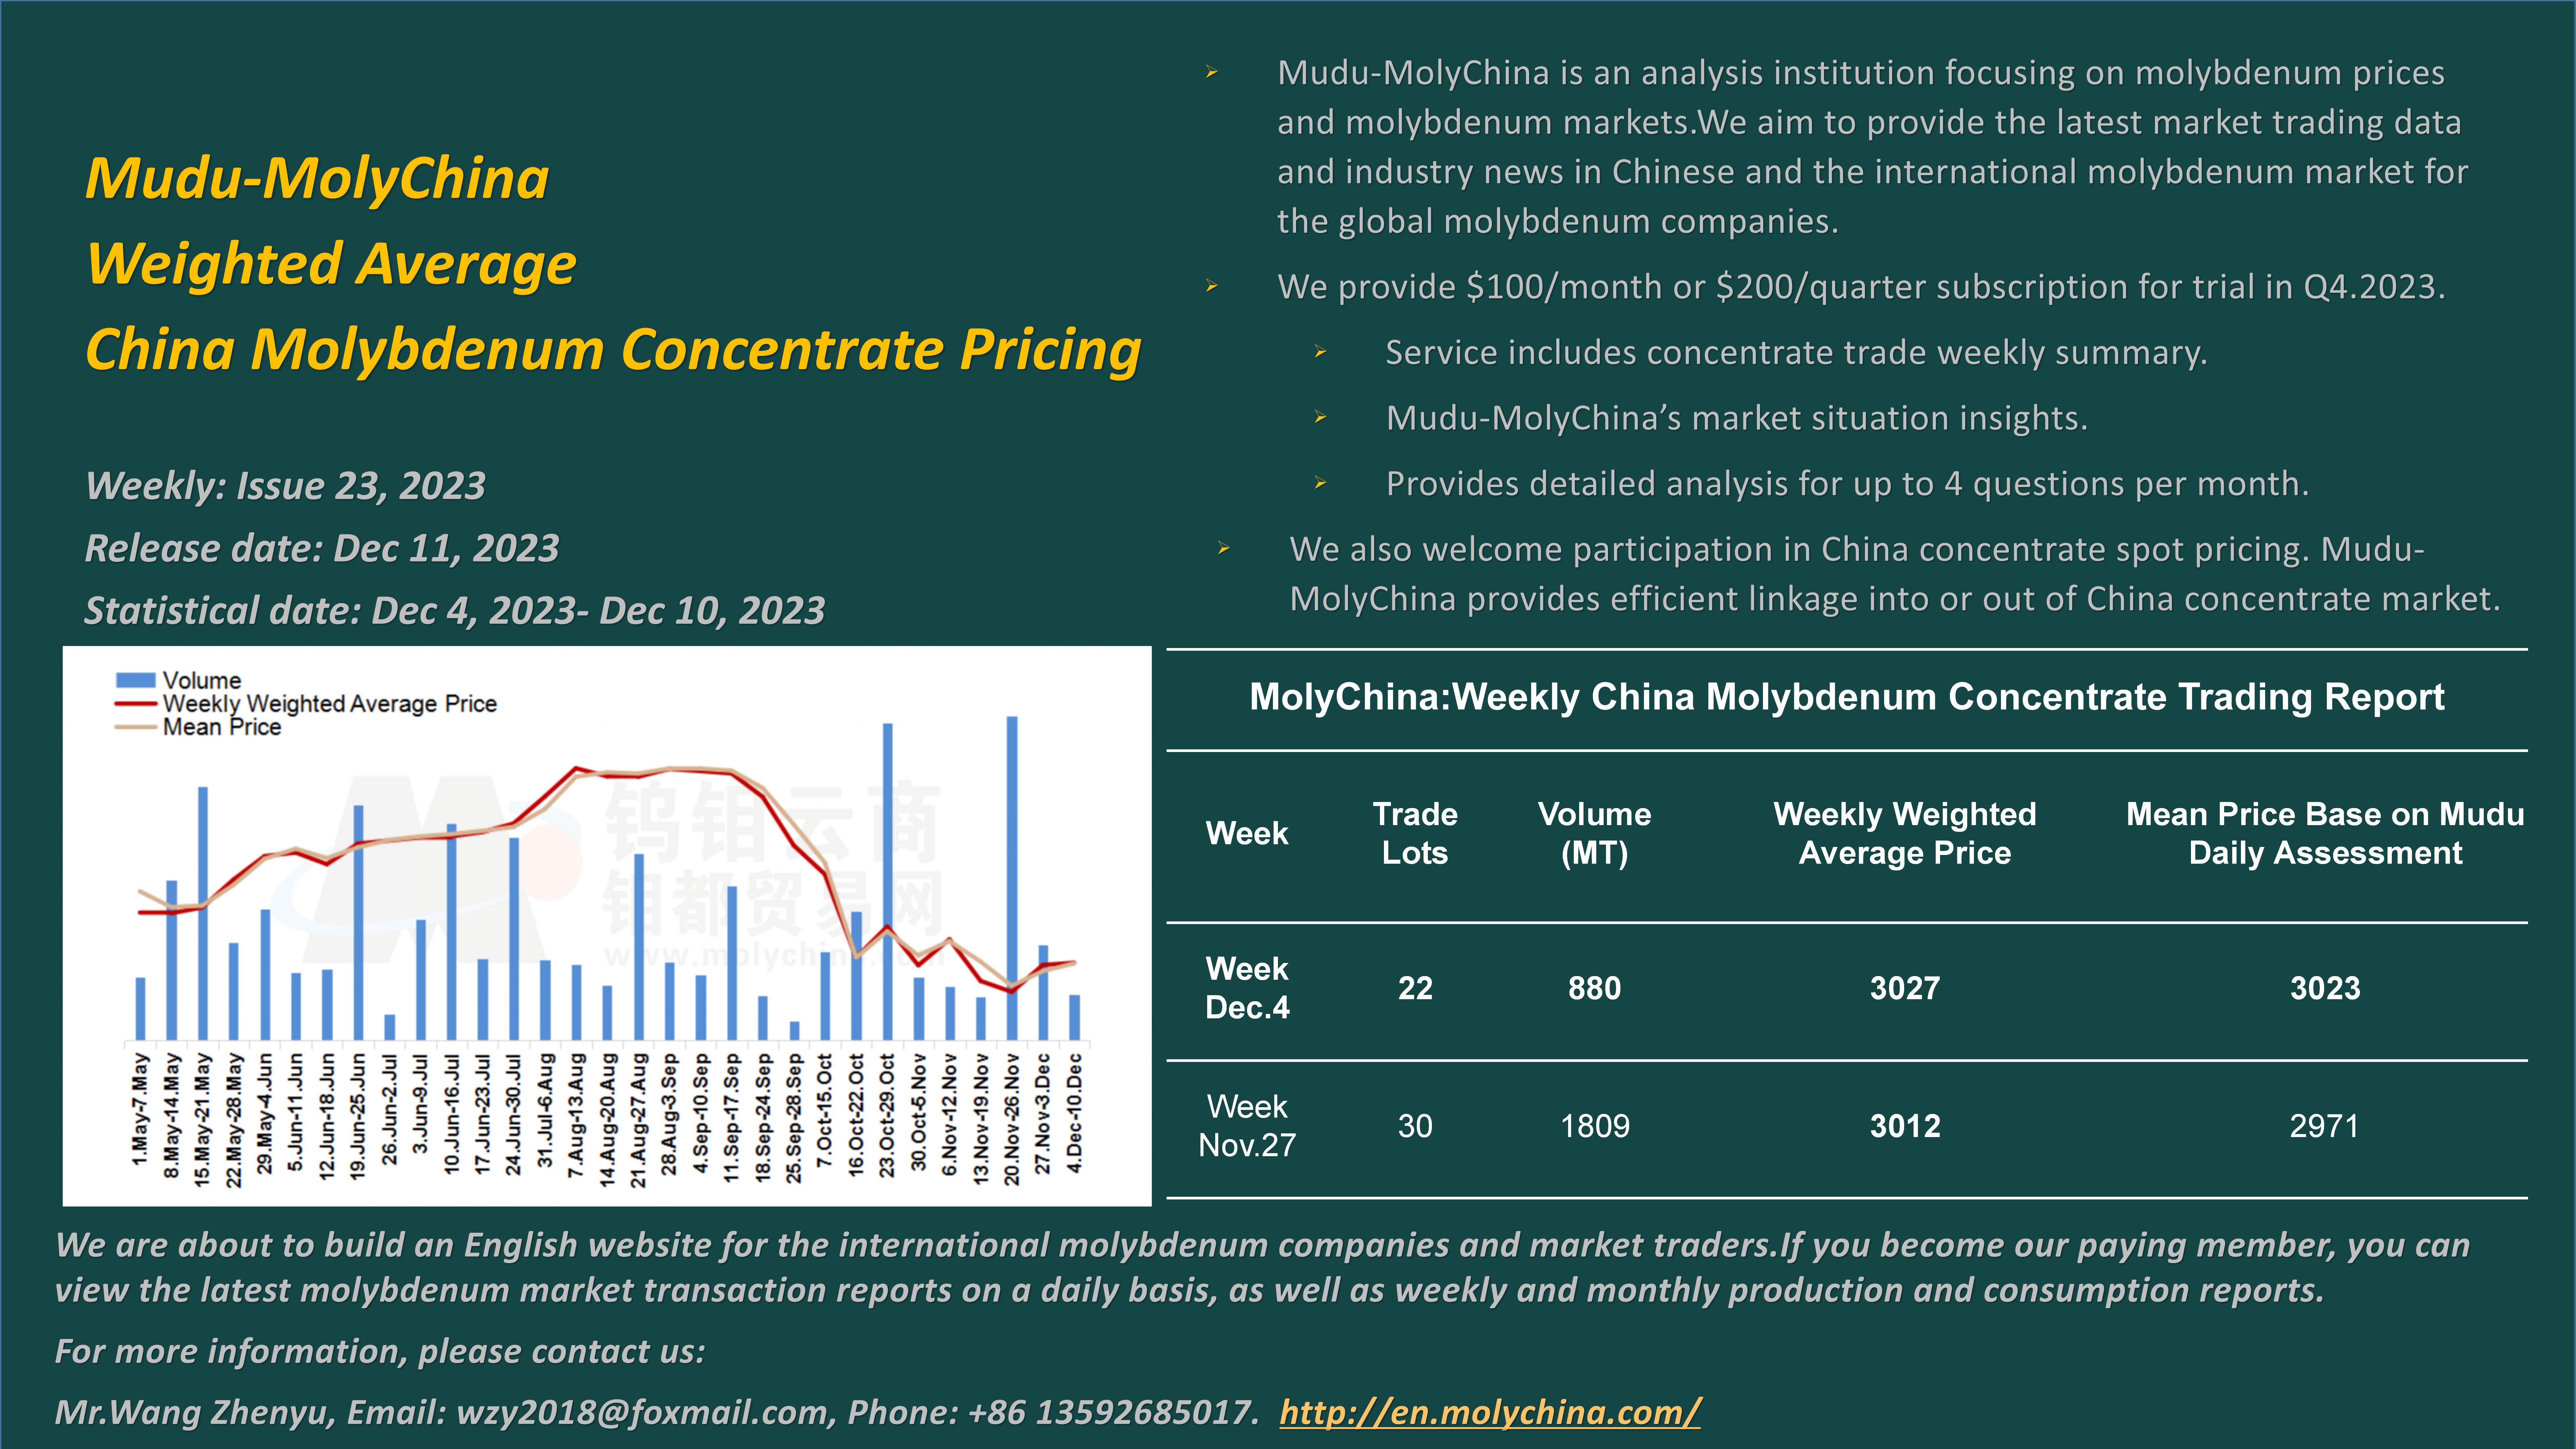 Dec.11-MolyChina Weekly Weighted Average Price Report1.jpg